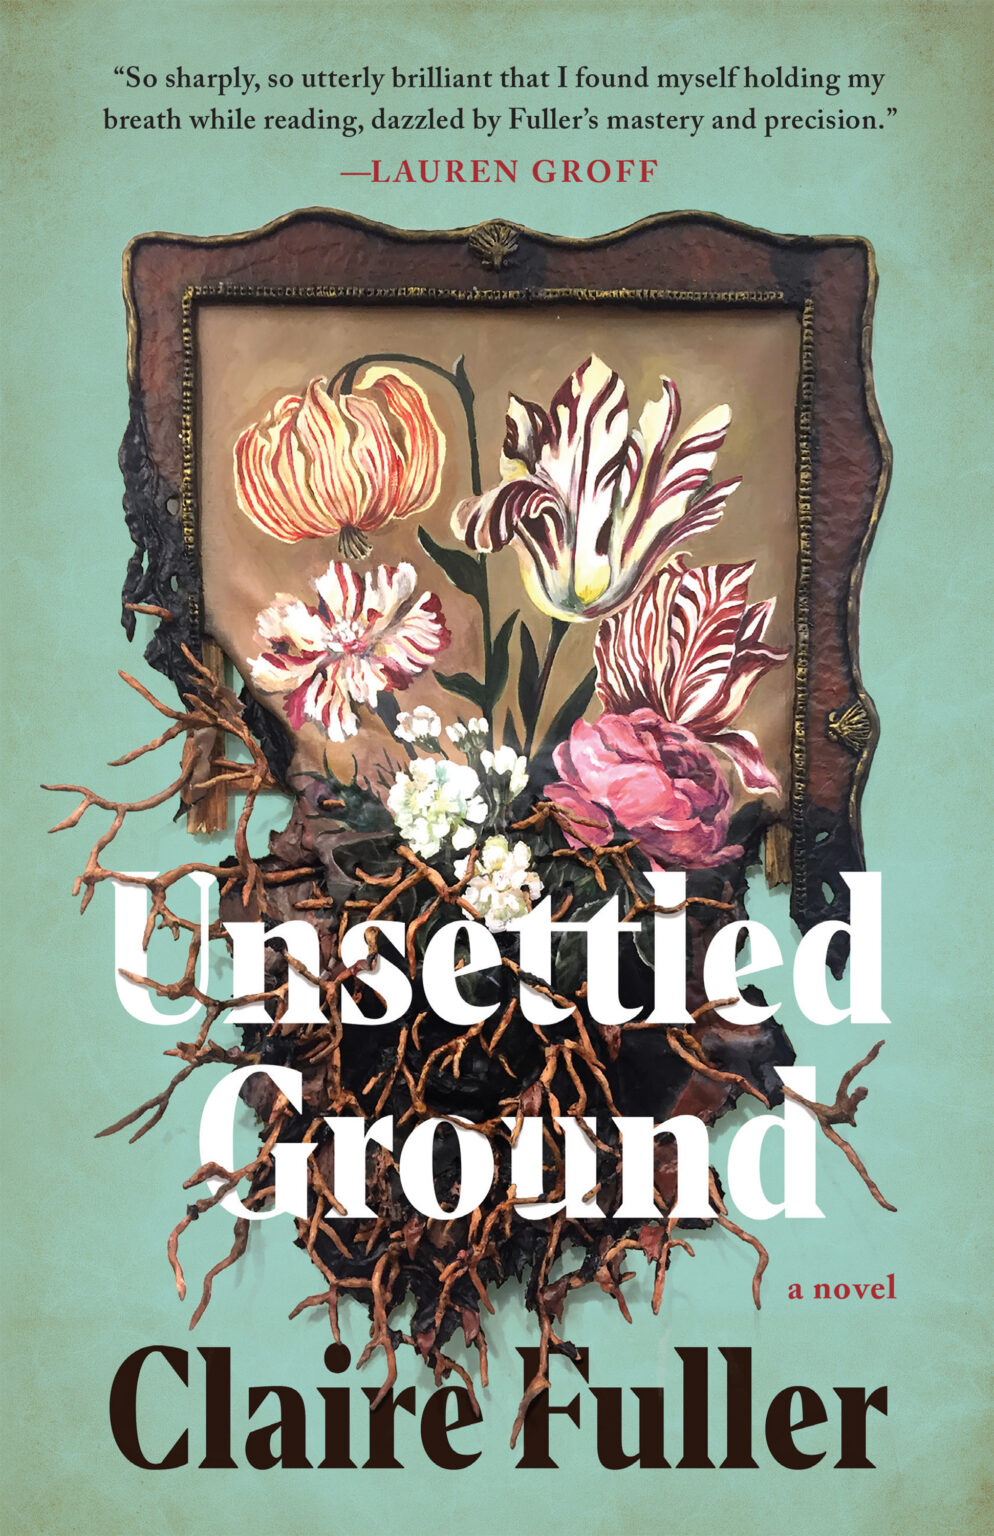 book unsettled ground